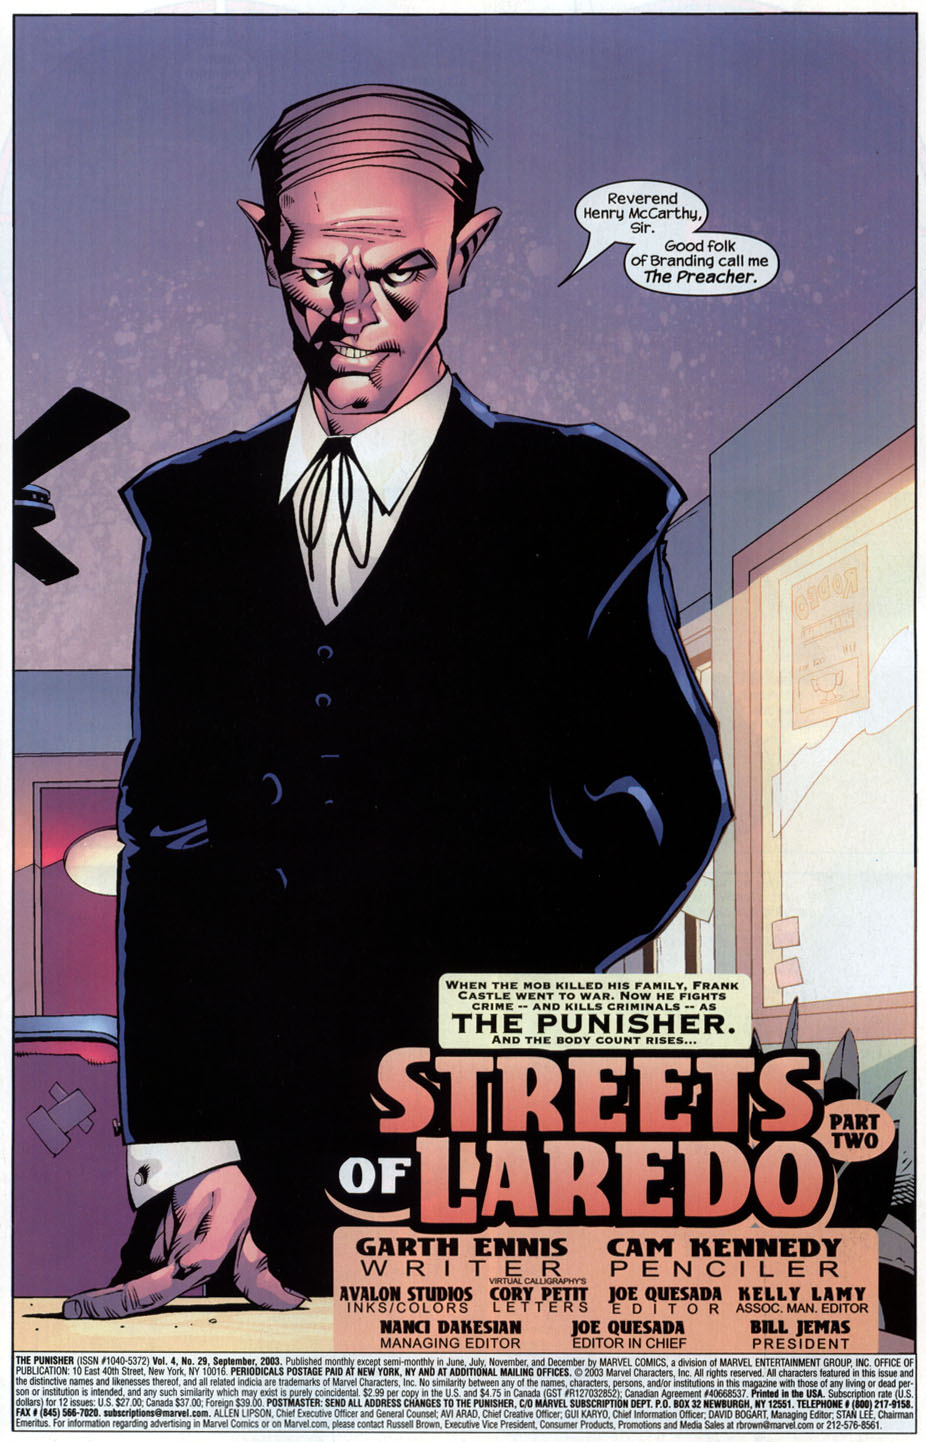 The Punisher (2001) issue 29 - Streets of Laredo #02 - Page 2